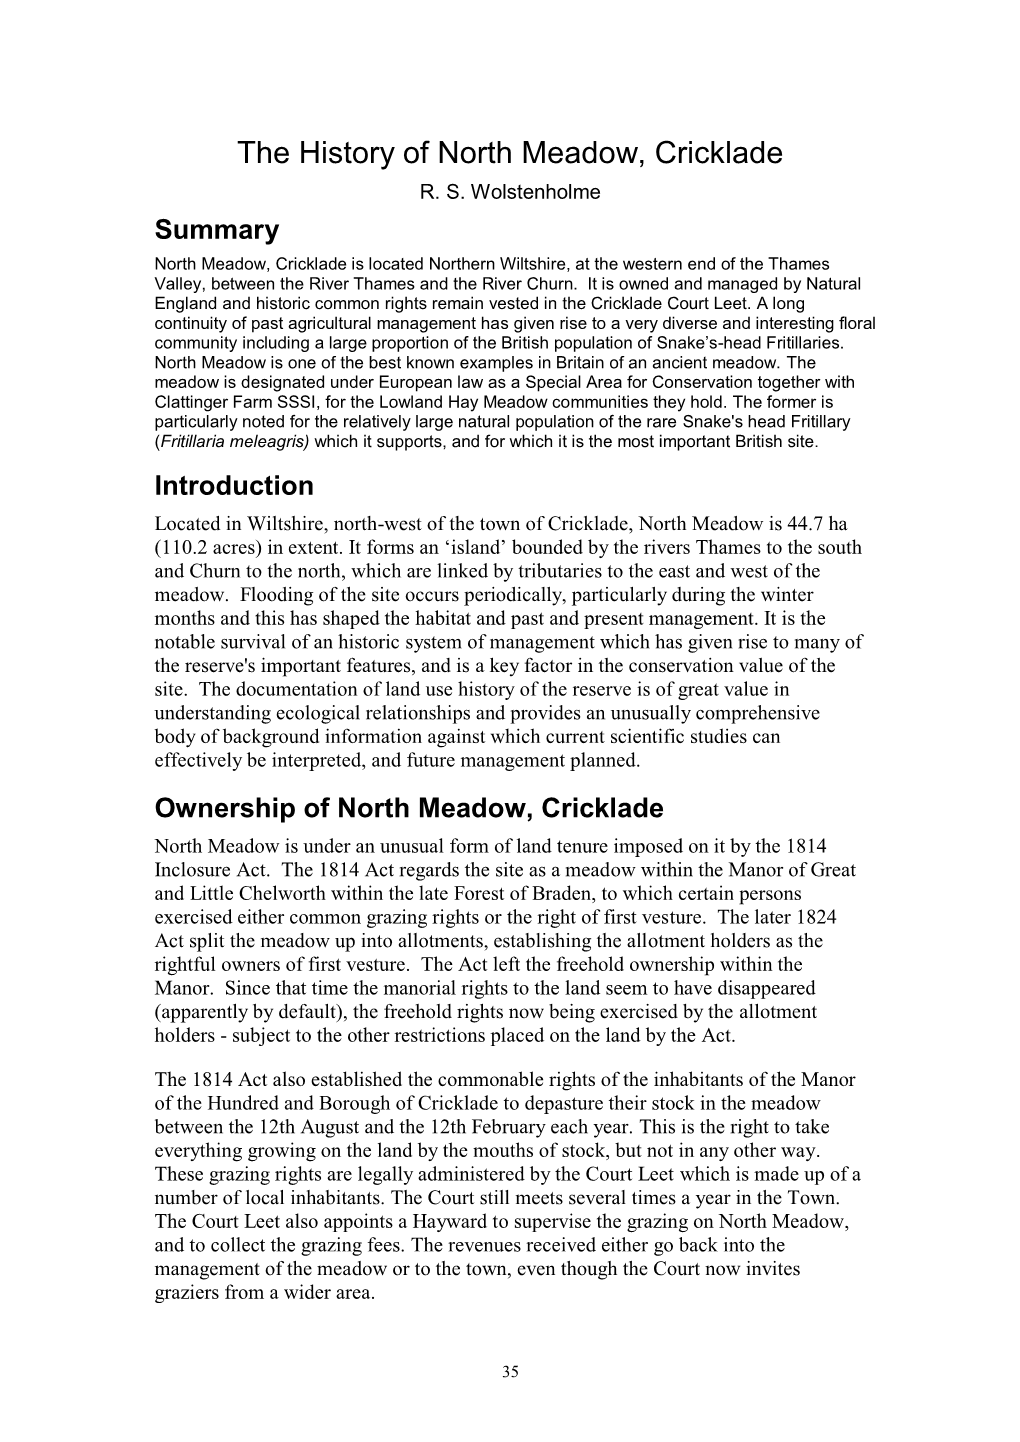 The History of North Meadow, Cricklade R